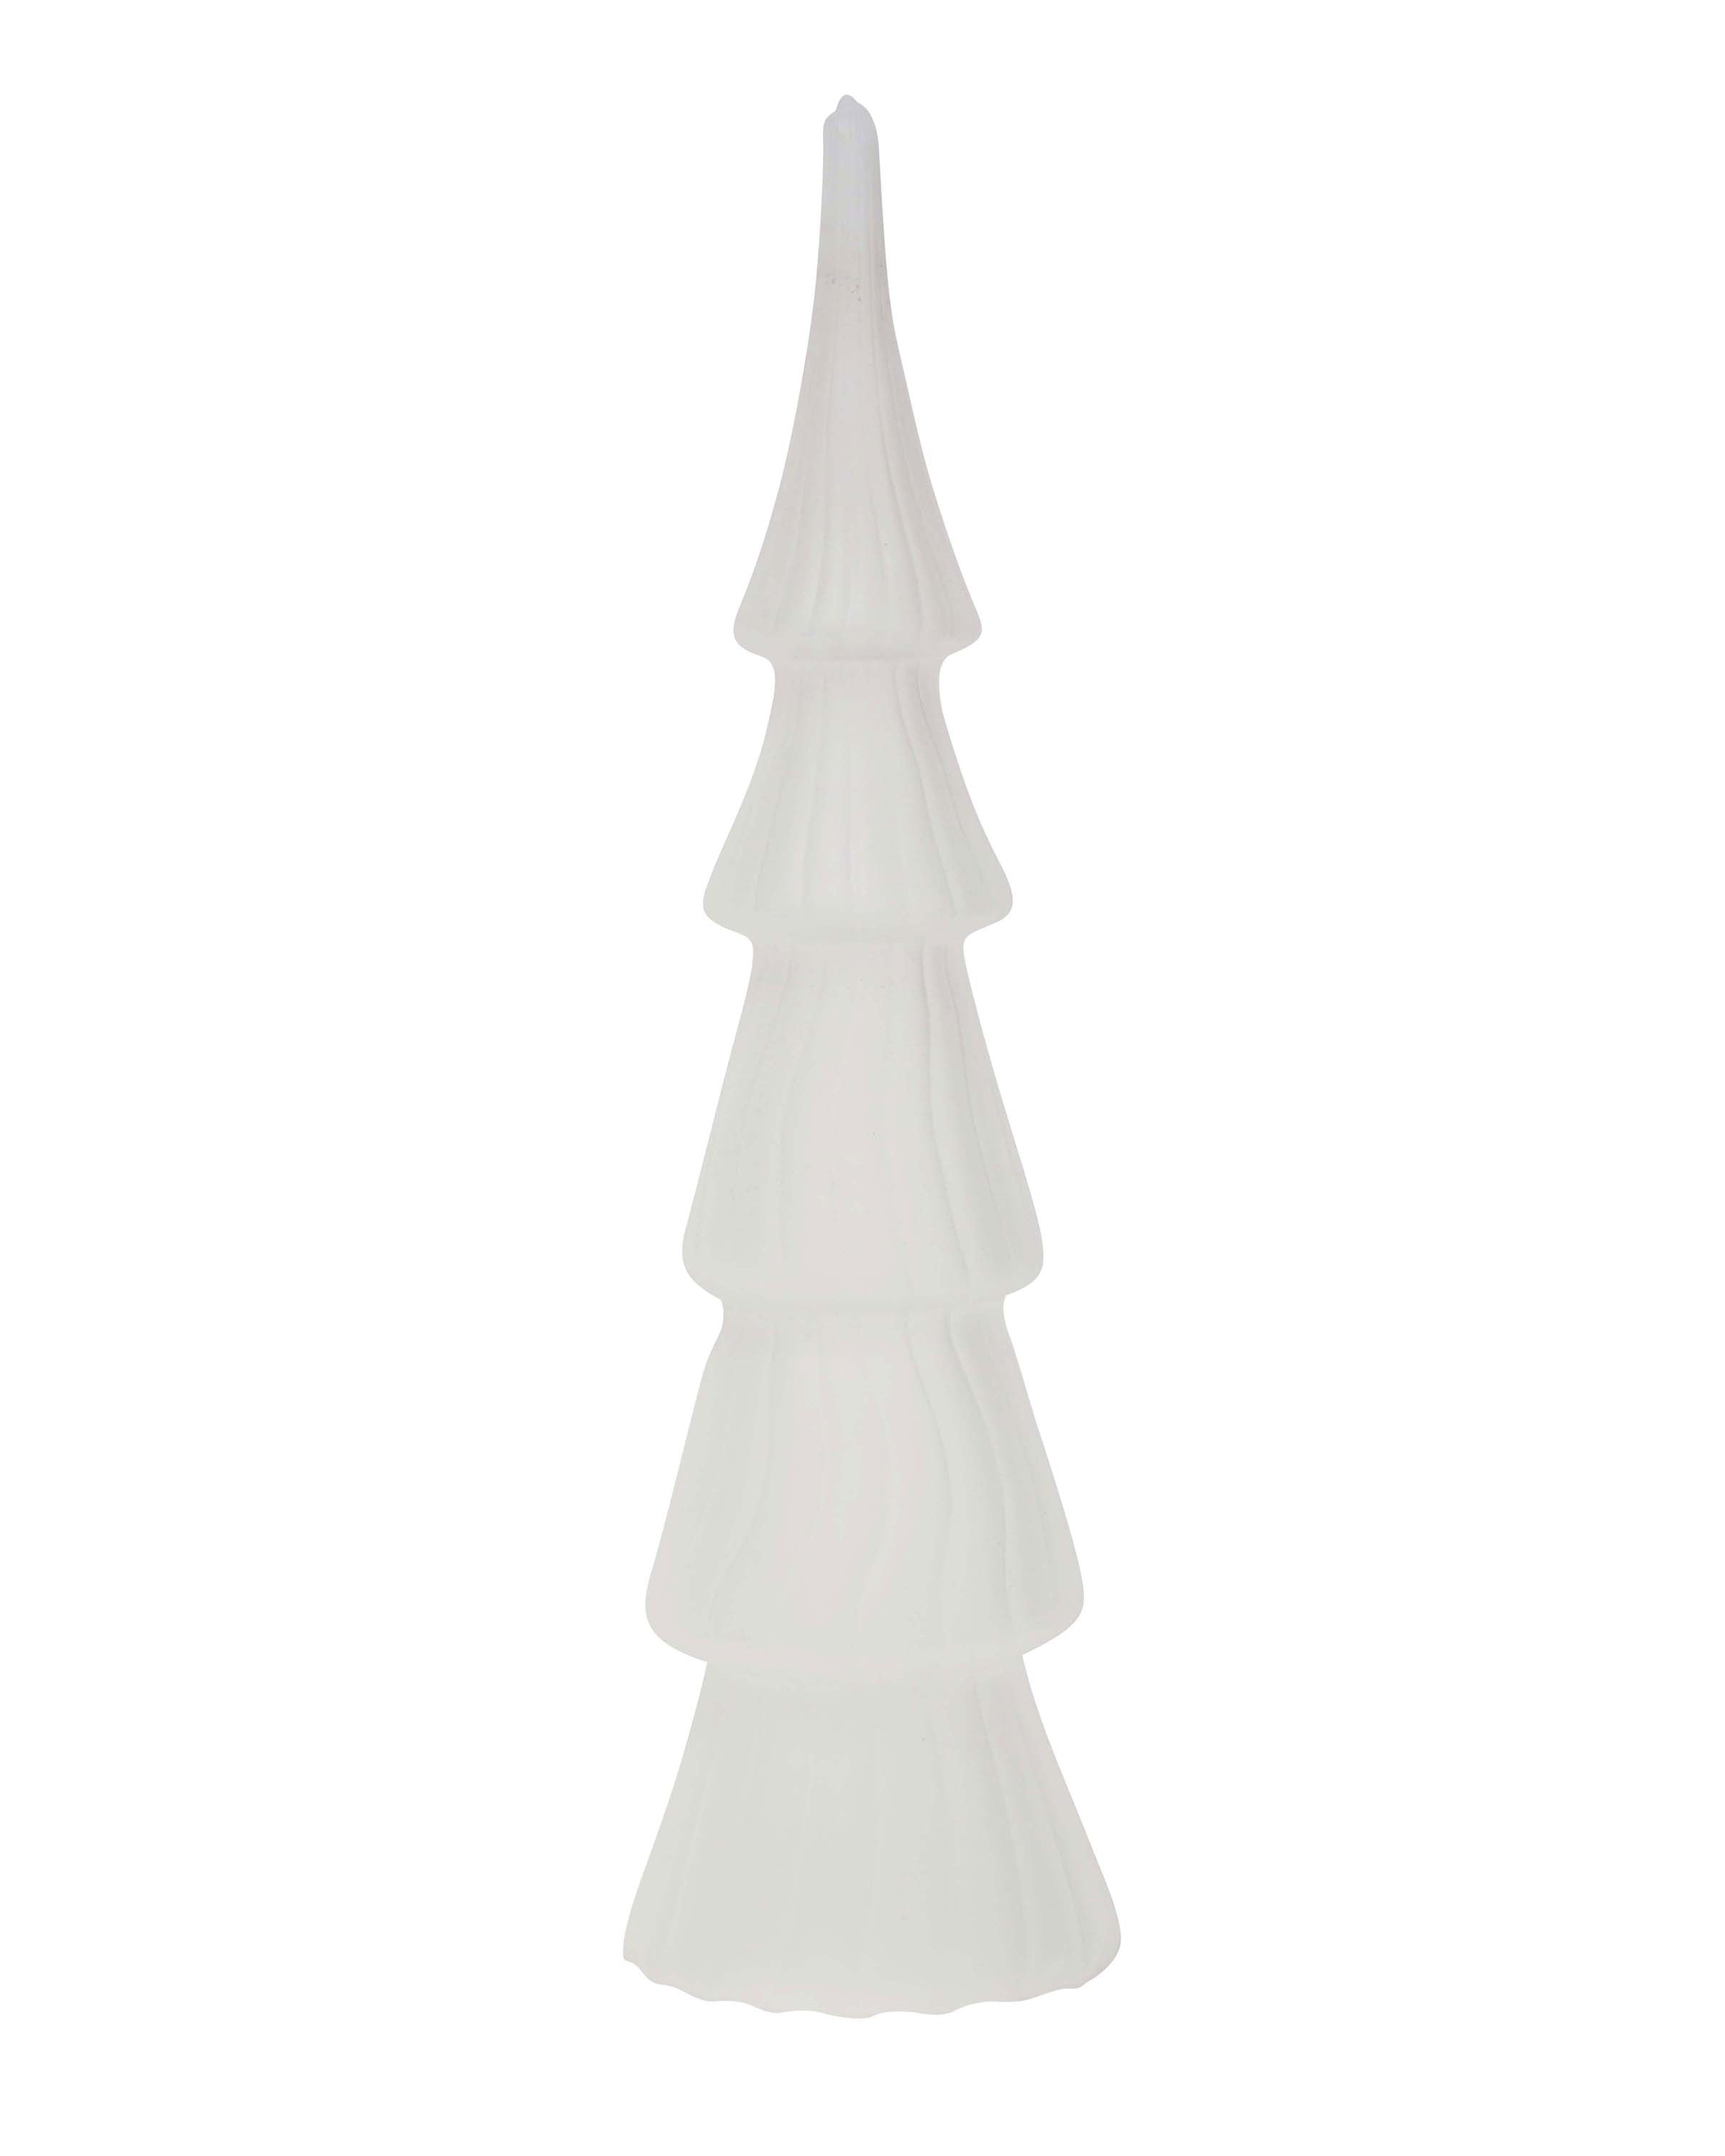 Maytime Five Tiered Frosted Glass Tree - Tall